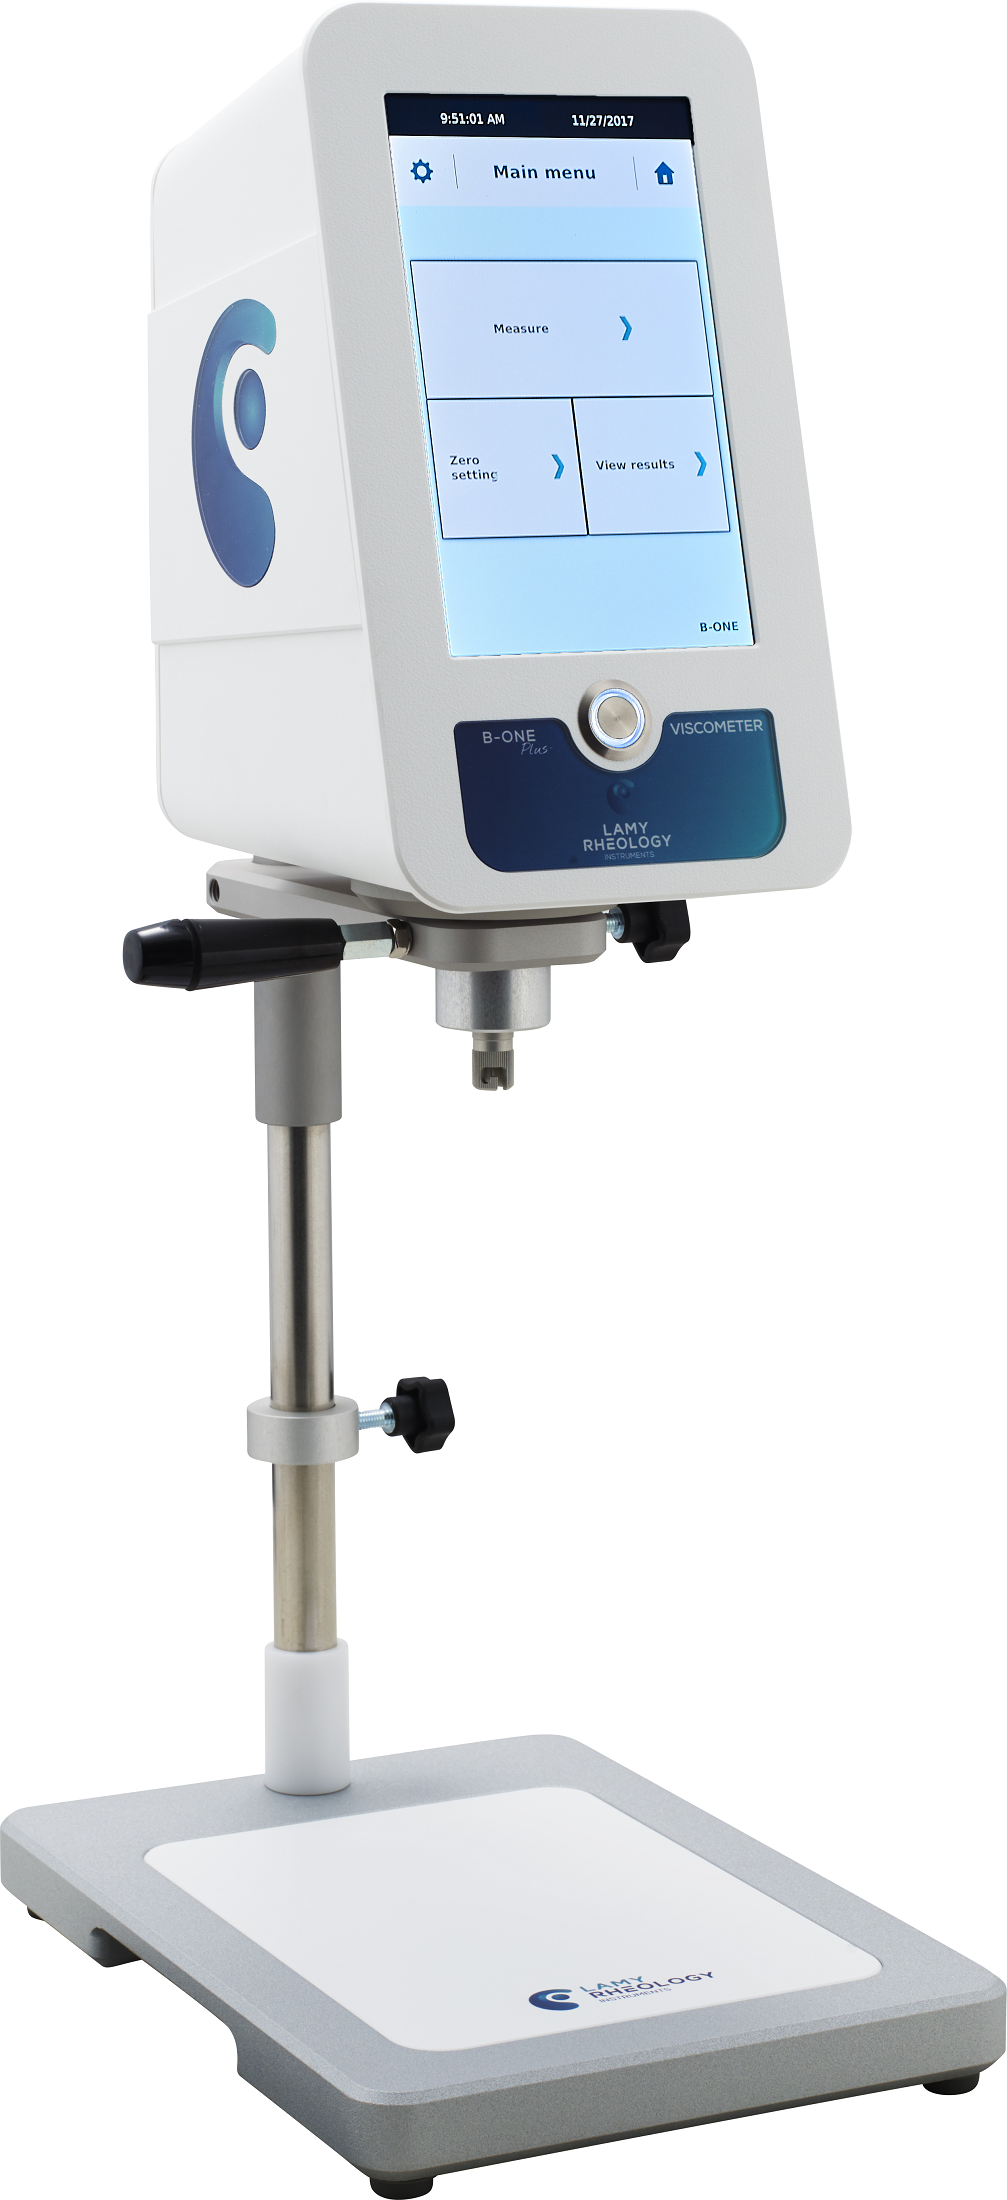 Lamy Rheology B-ONE Plus Rotating SpringLess Viscometer with 7" Touch Screen Supplied with Stand